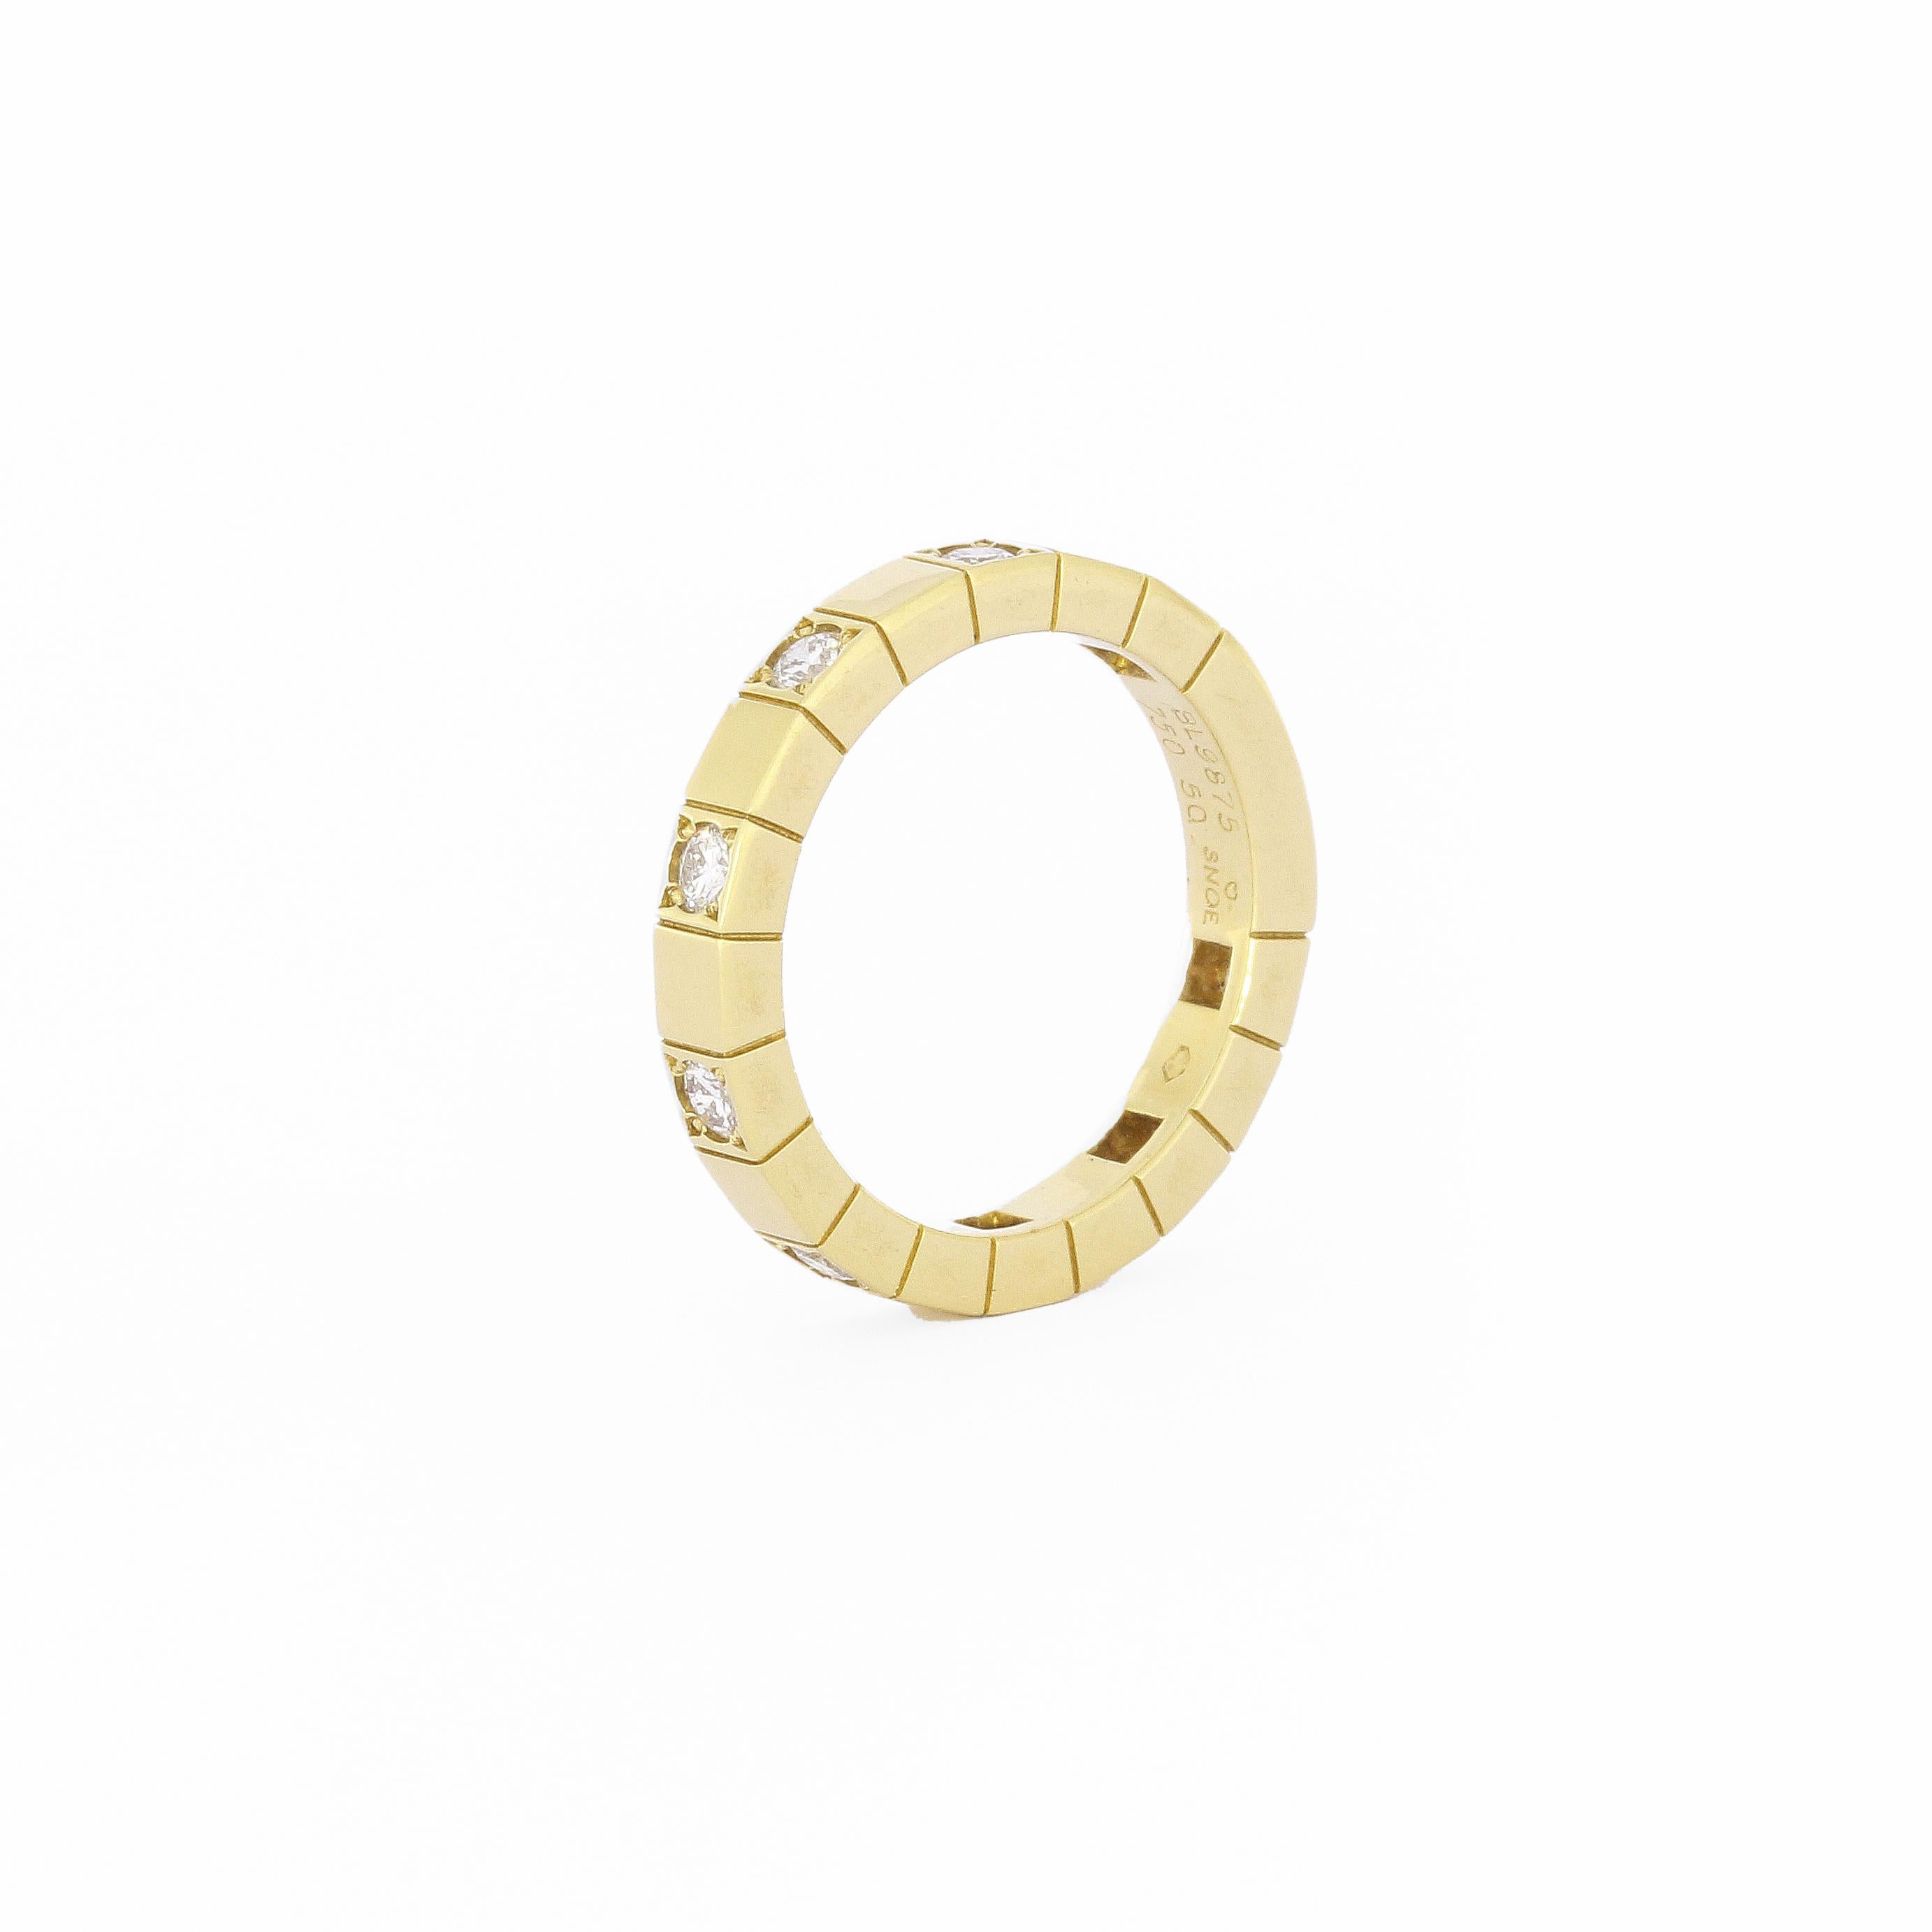 Contemporary Cartier Lanières Yellow Gold 0.36 Carat Diamond Band Ring For Sale